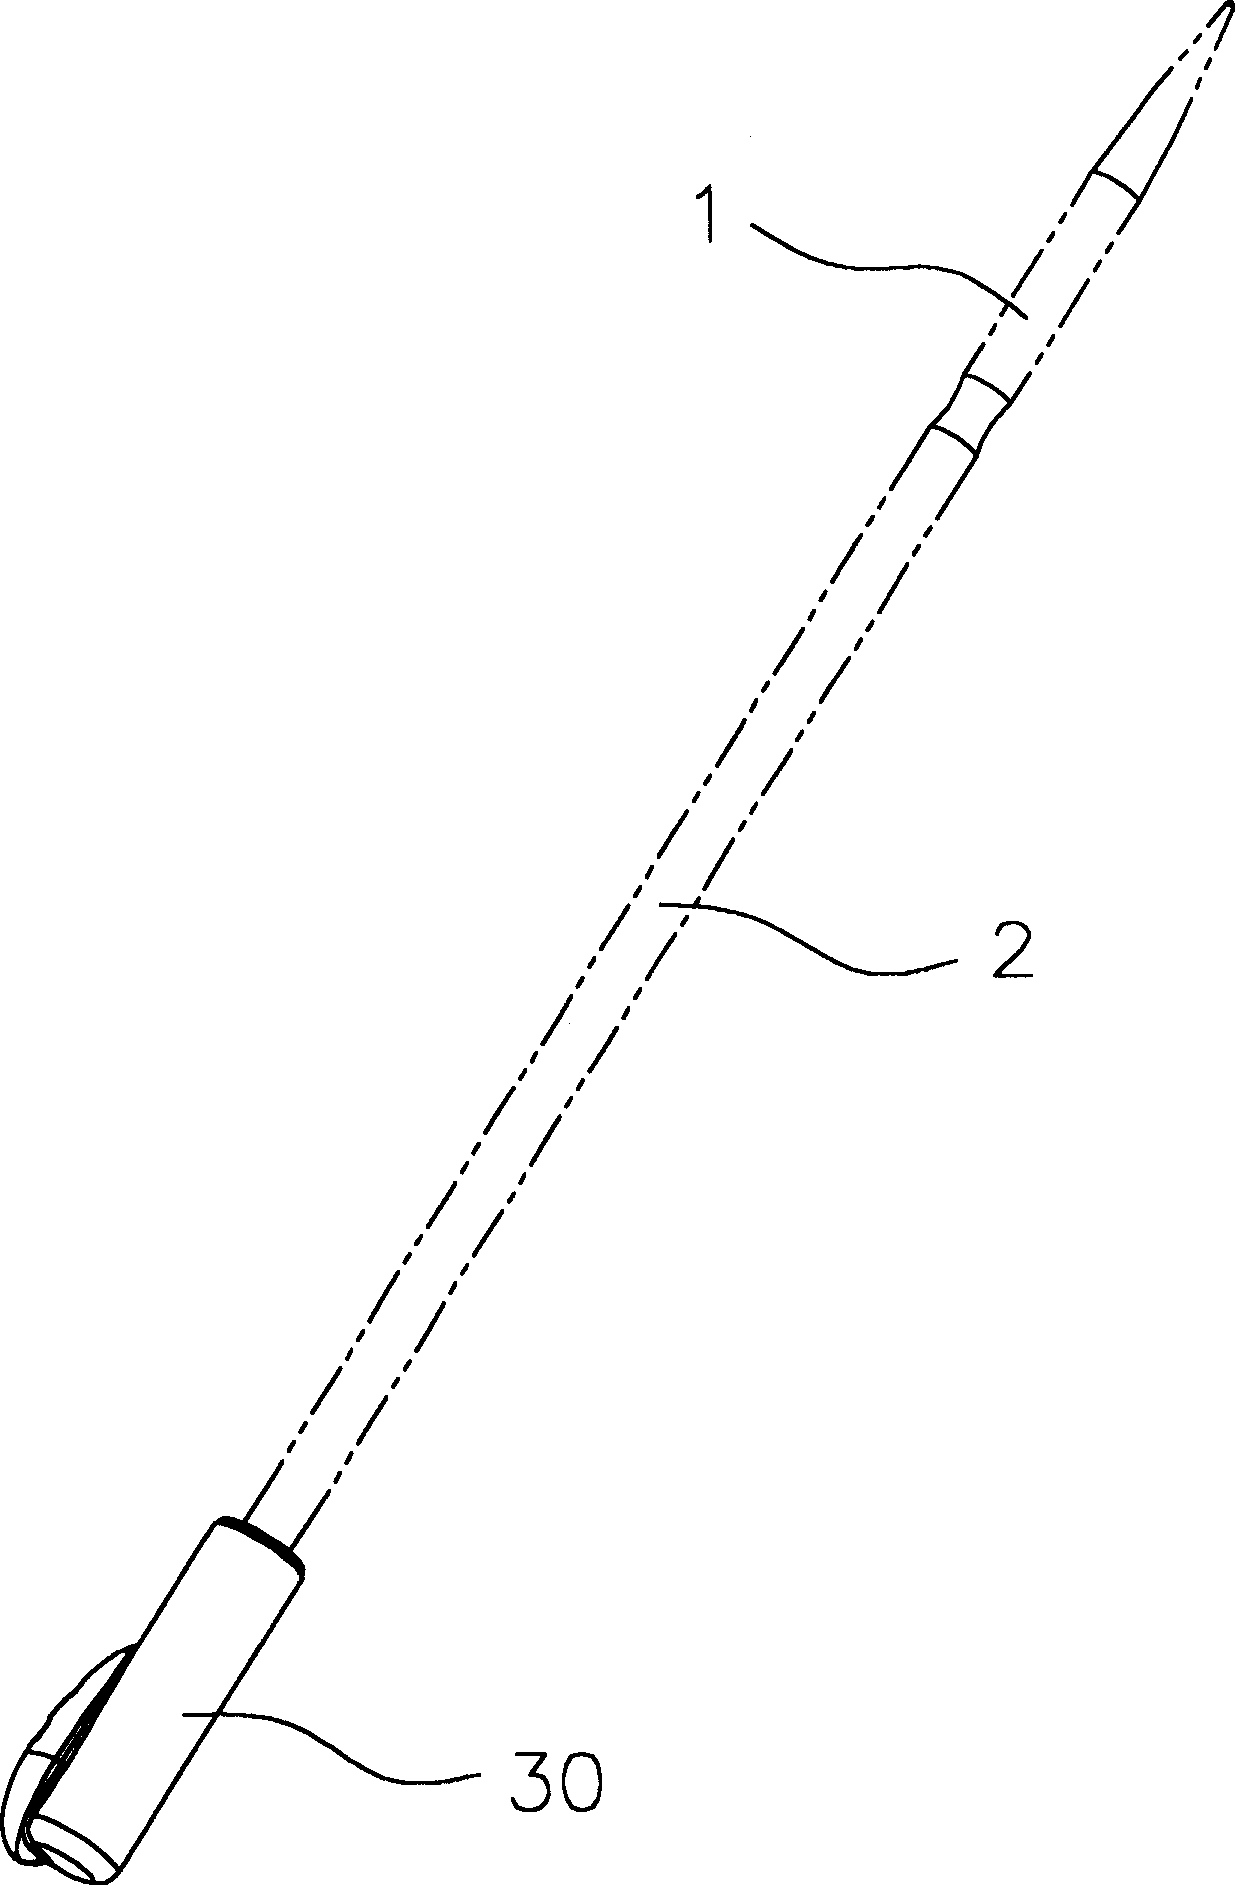 Injection moulding method for stylus